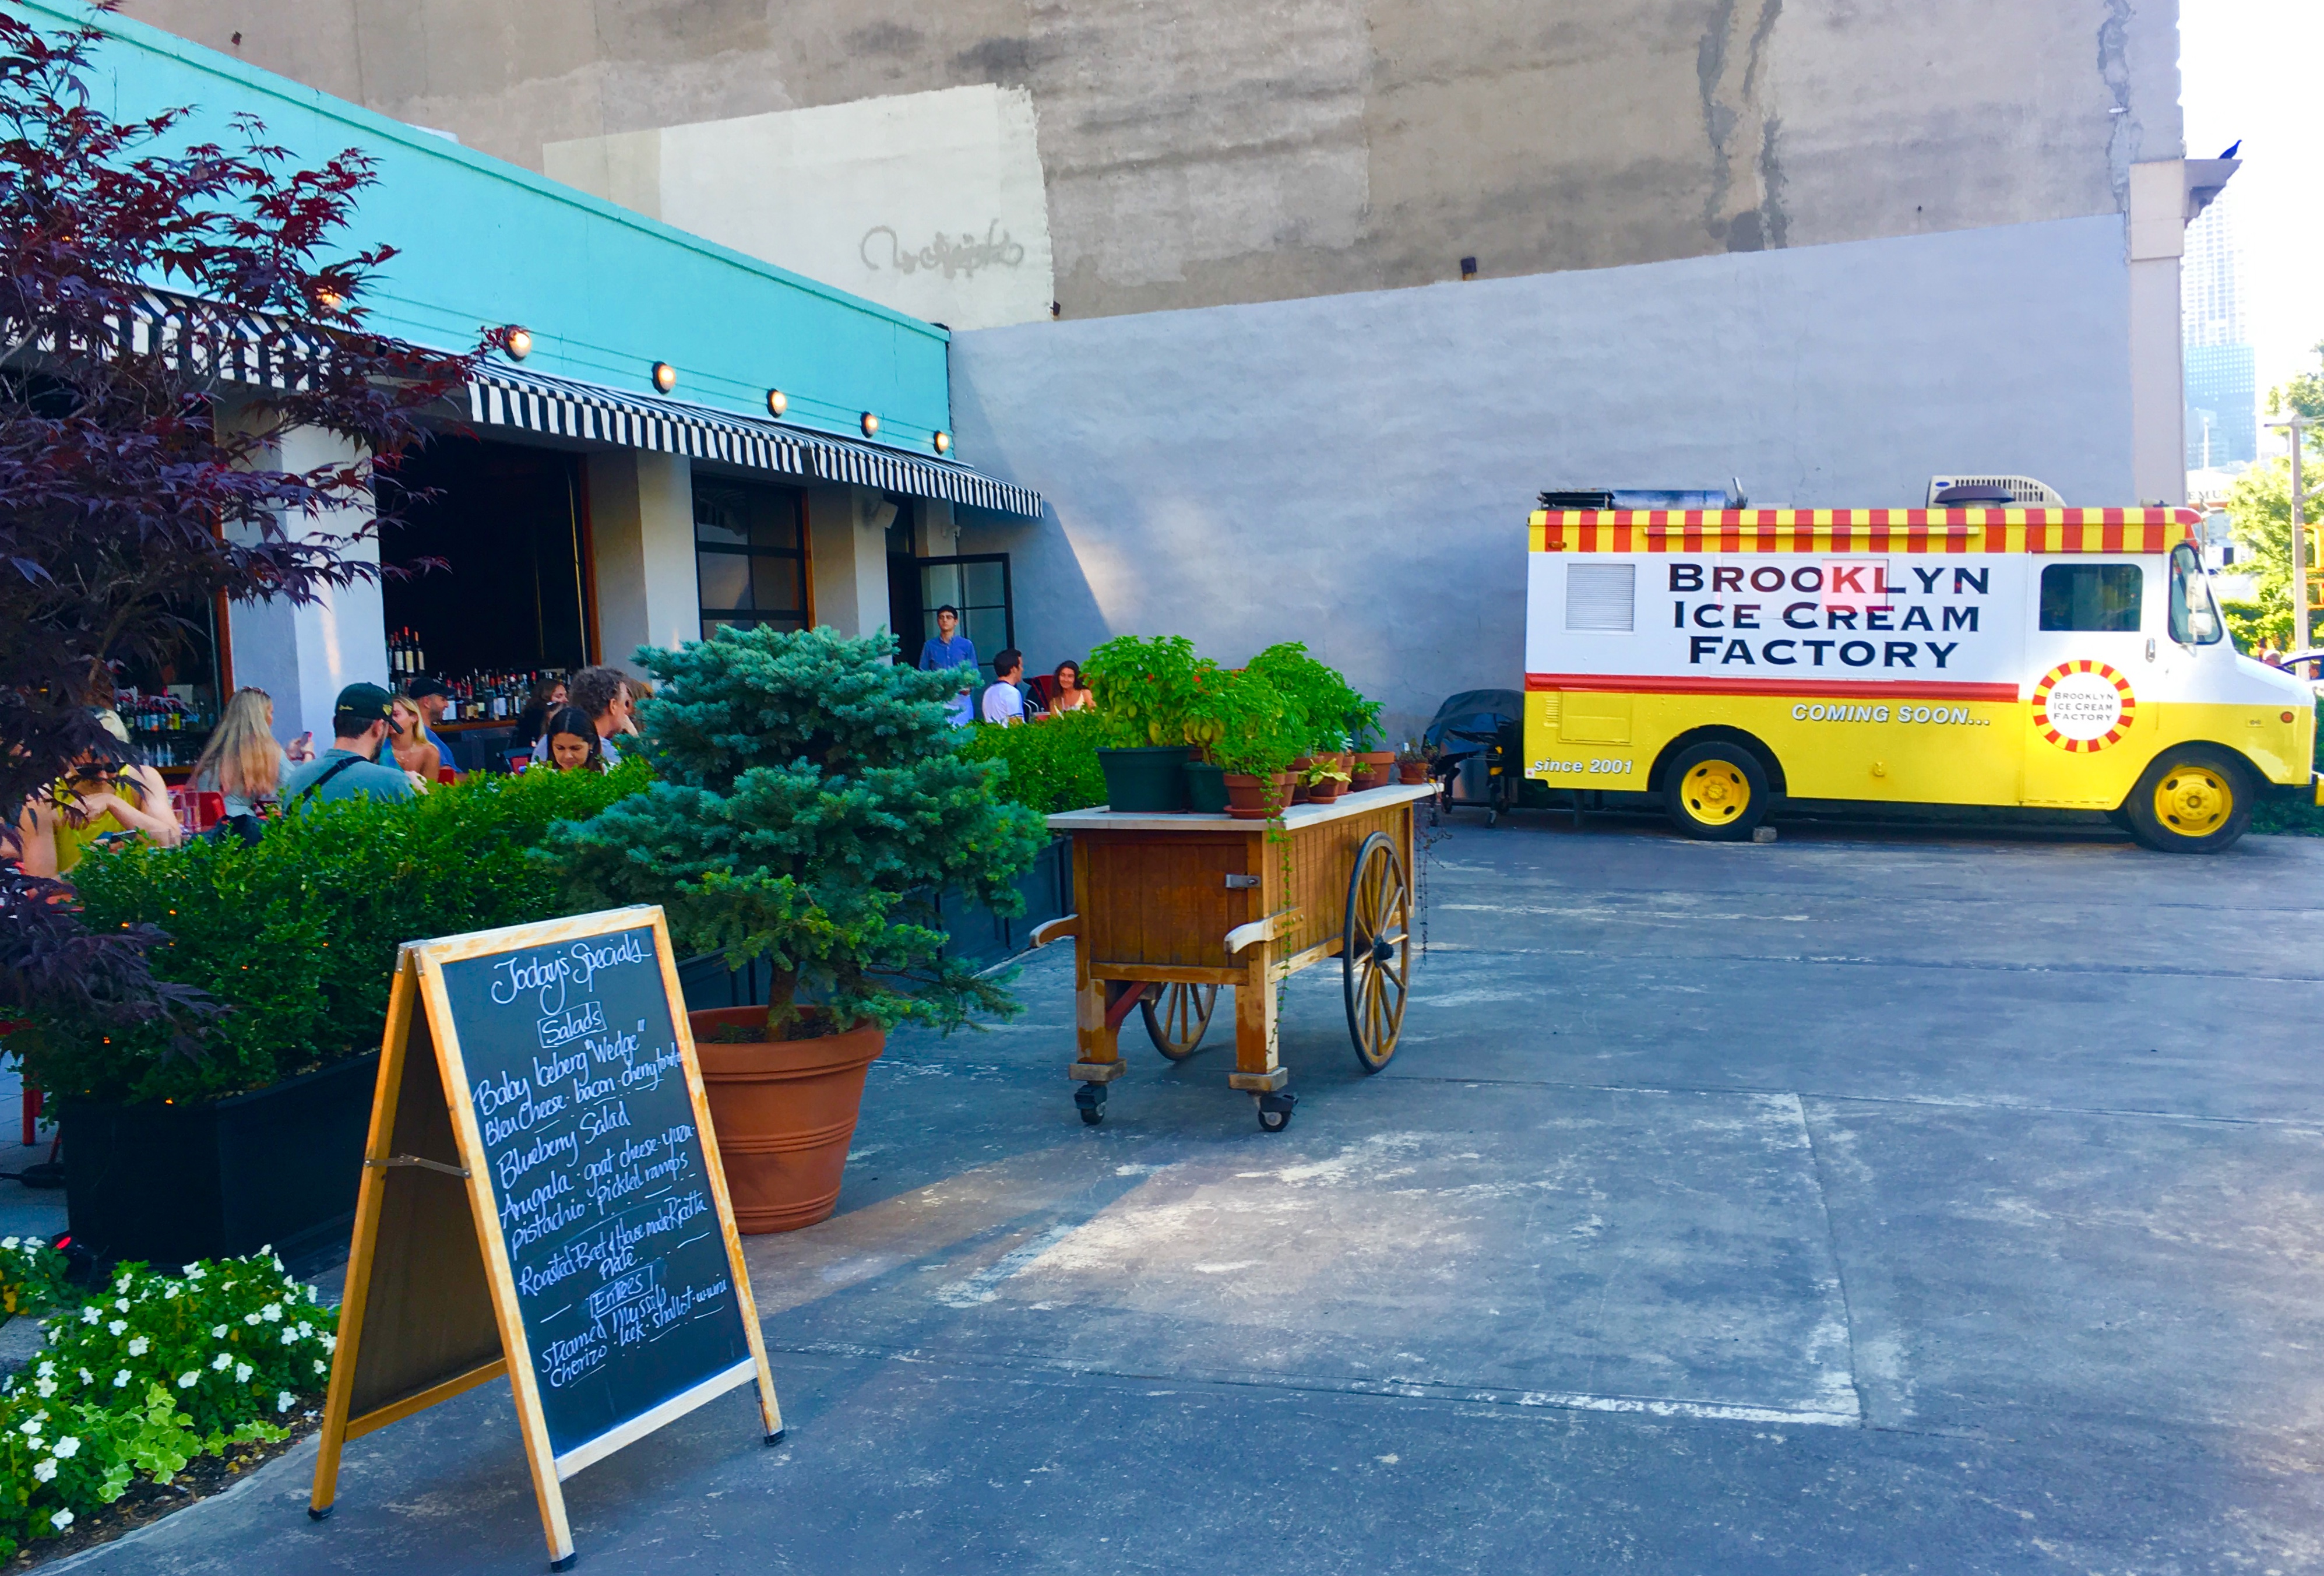 This is the restaurant at 14 Old Fulton St. The truck stands in the spot where Brooklyn Ice Cream Factory plans to open a stand. Eagle photo by Lore Croghan